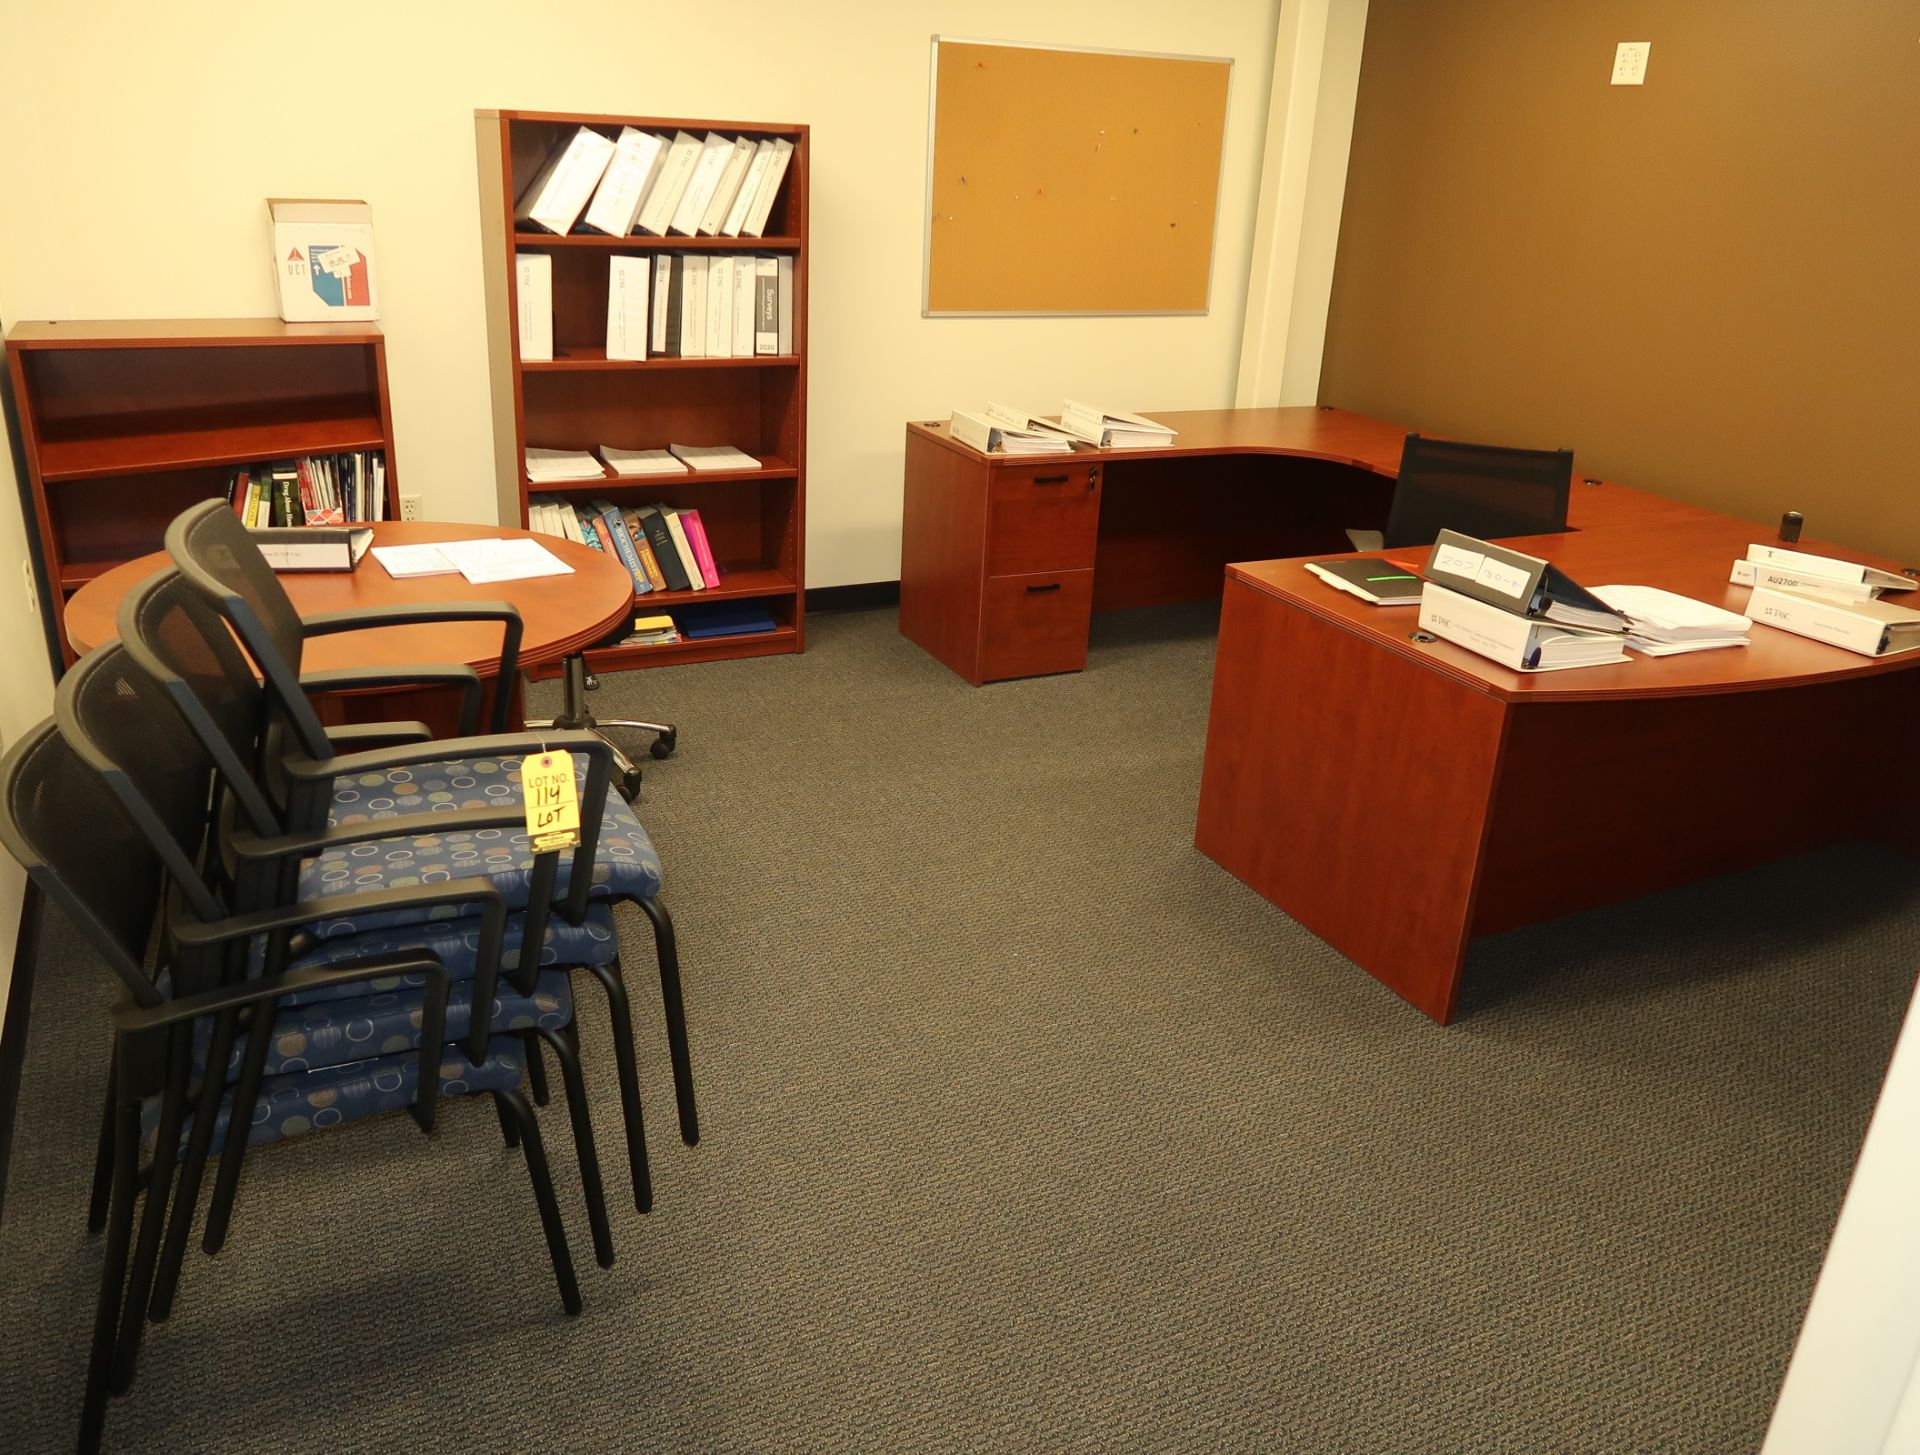 LOT CONTENTS OF OFFICE, 4-SIDE CHAIRS, TASK CHAIR, U-SHAPED DESK, 42" ROUND TABLE, 2-BOOK CASES,